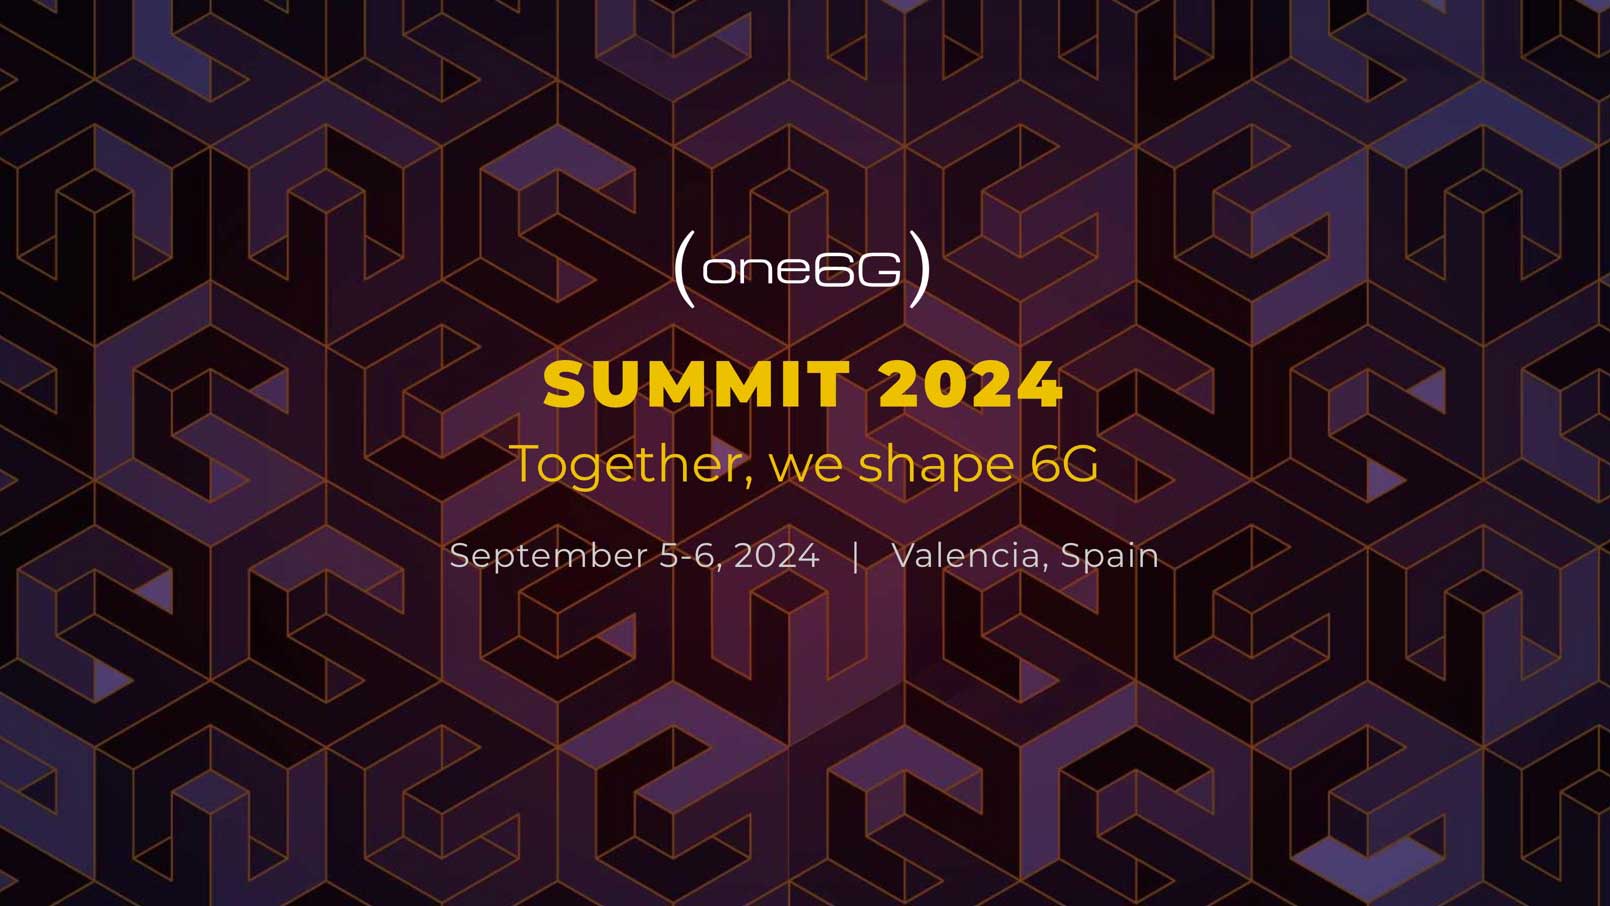 Promotional graphic for the one6G Summit 2024, September 5-6 in Valencia, Spain.